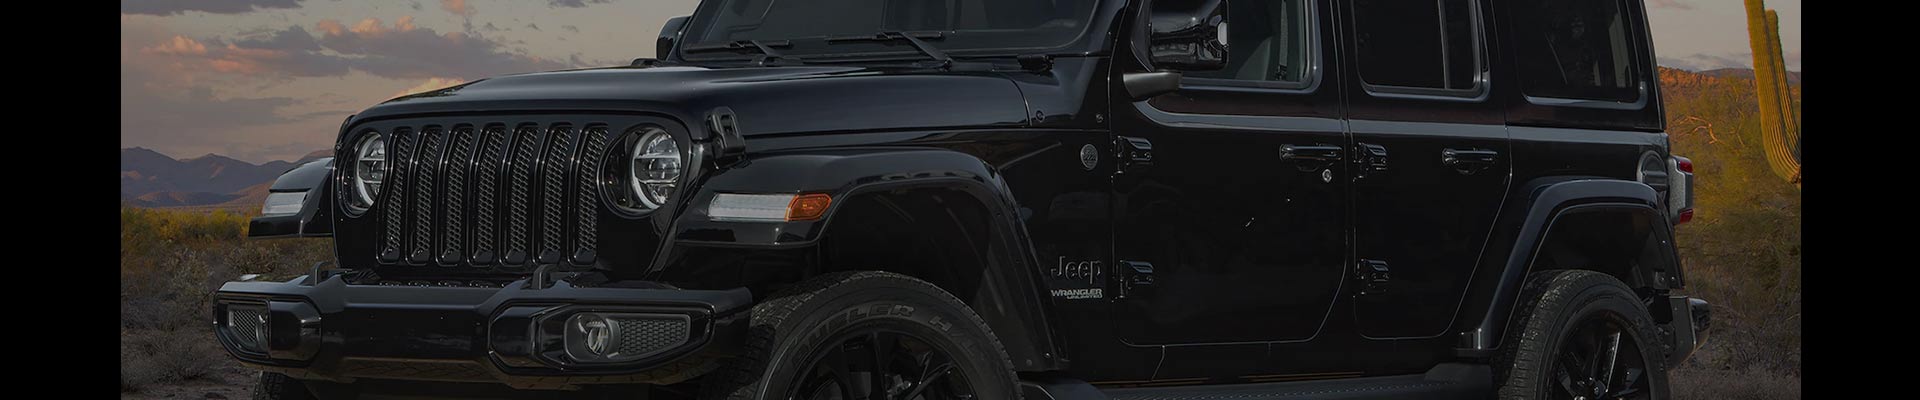 Shop Replacement and OEM 1989 Jeep Wrangler Parts with Discounted Price on the Net